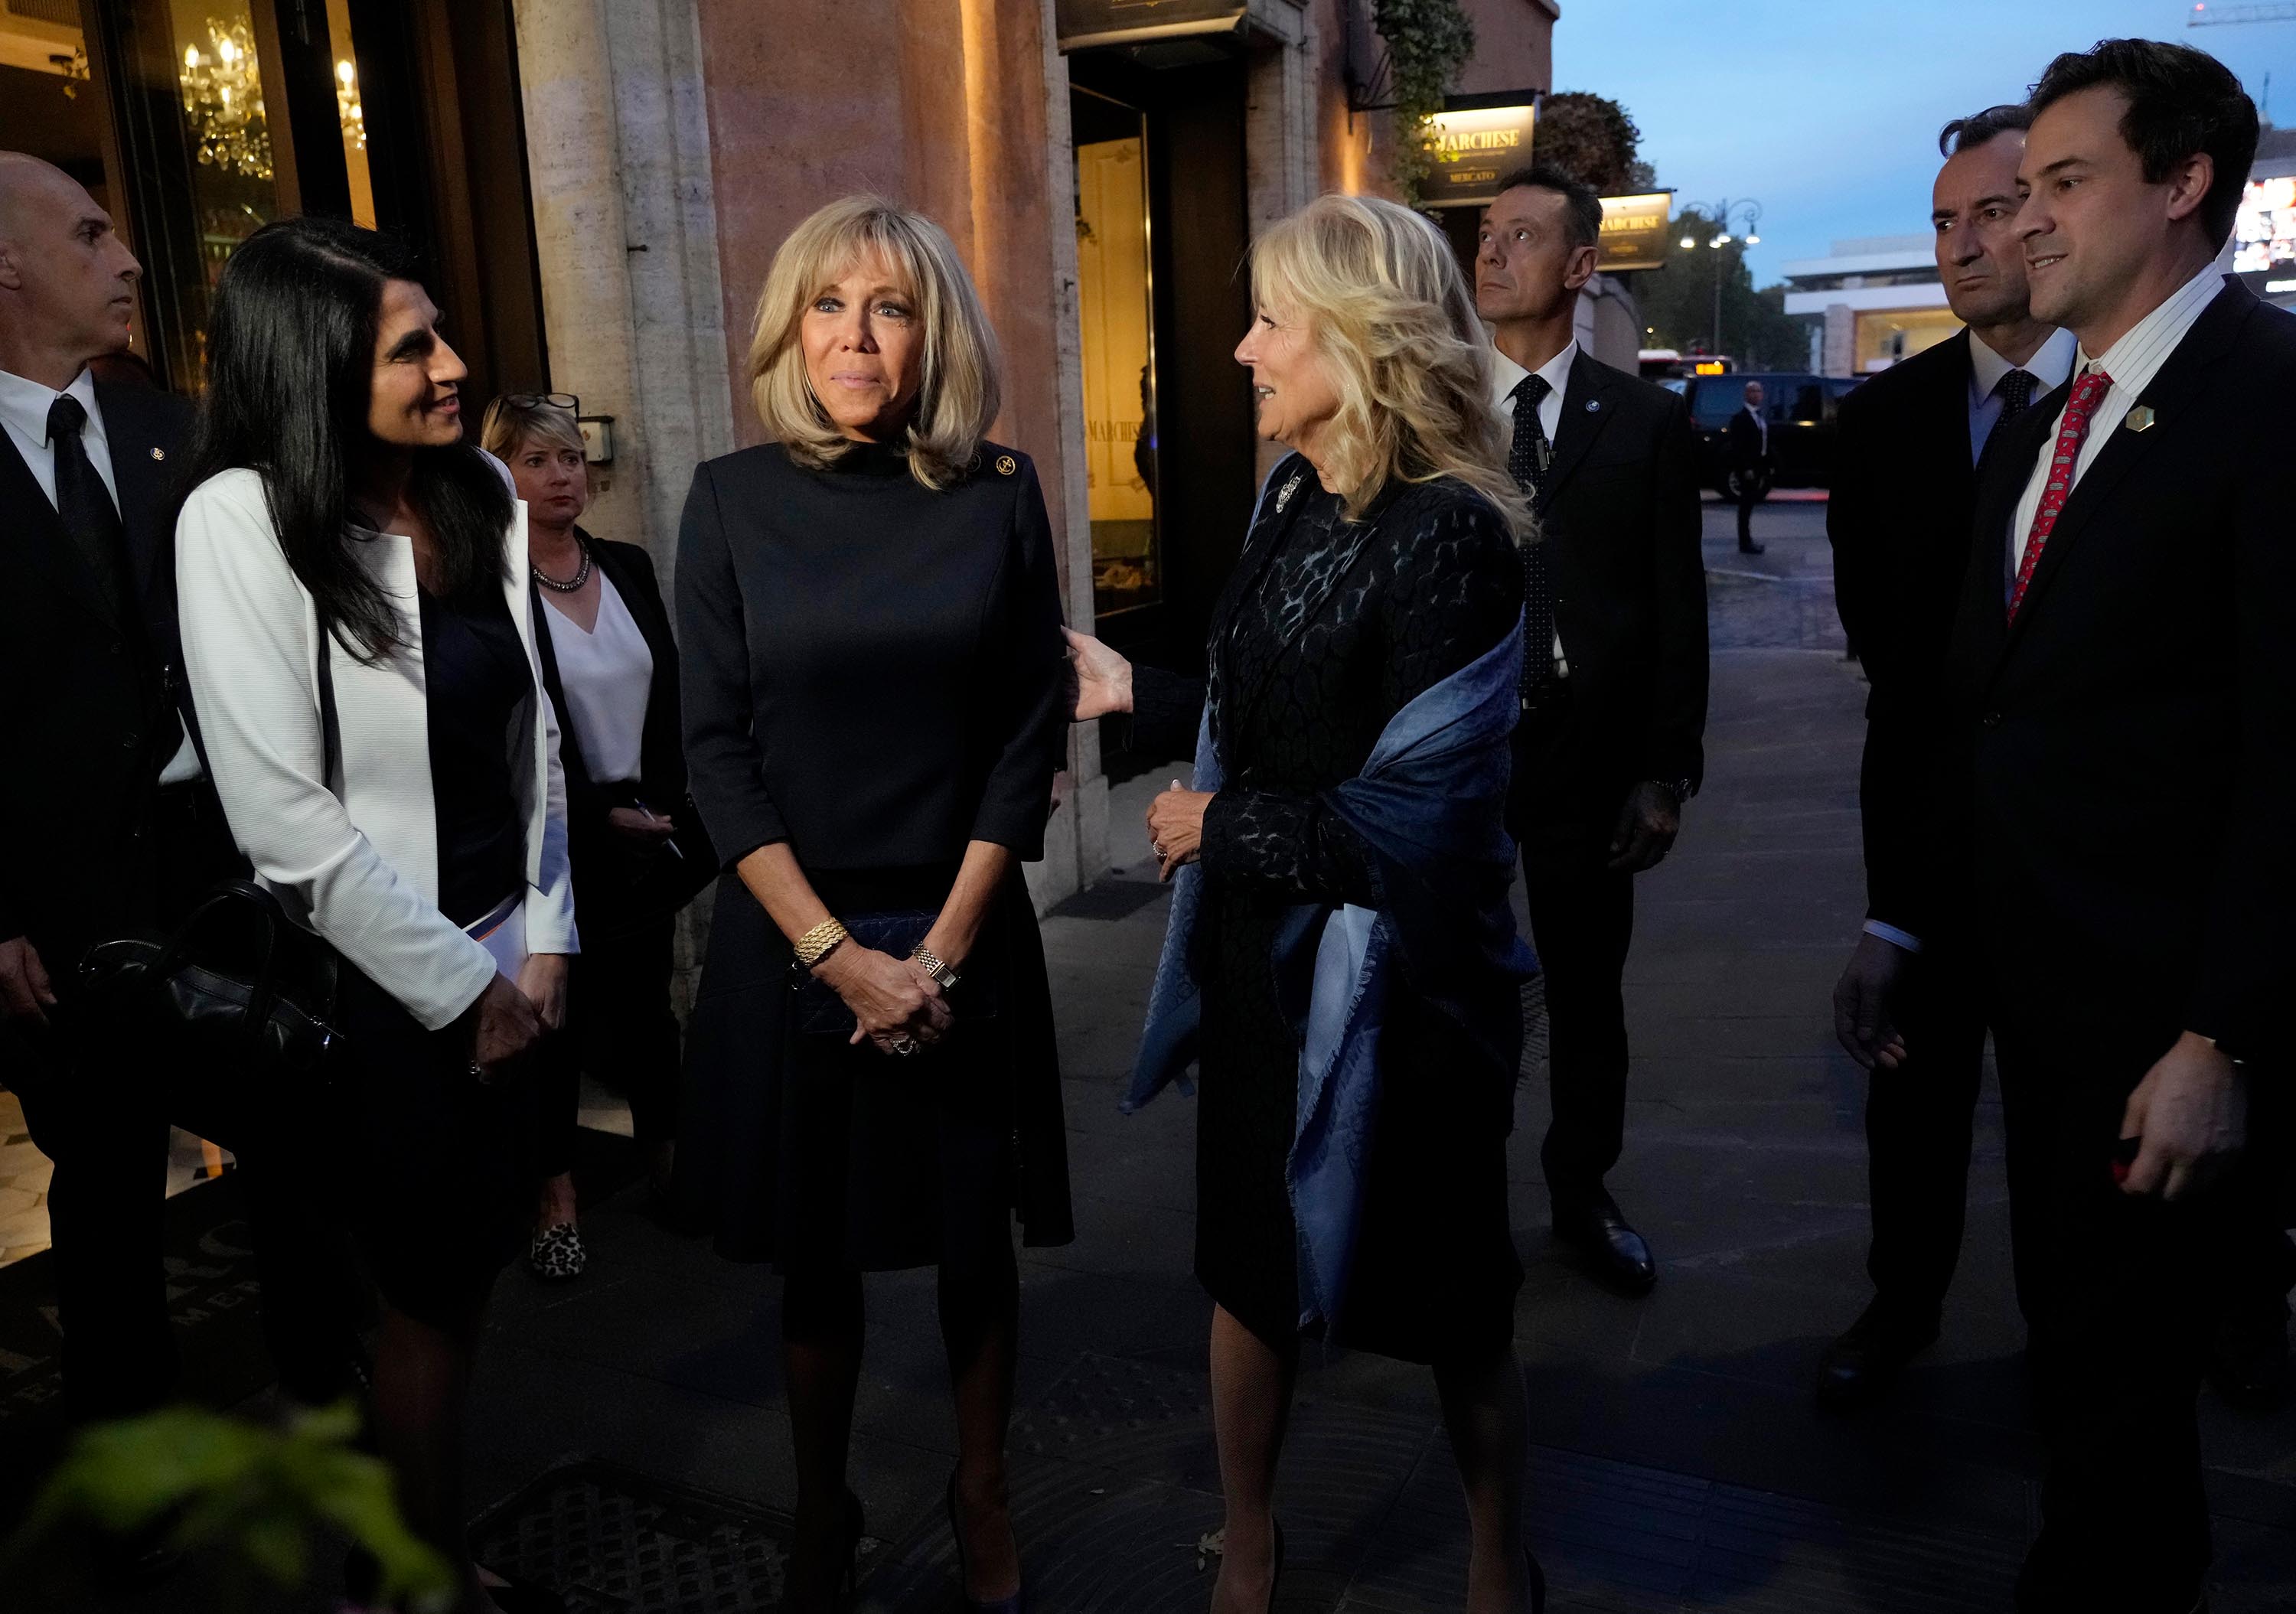 US first lady Jill Biden, center, and French first lady Brigitte Macron, center left, speak outside of a restaurant on the sidelines of an upcoming G20 summit in Rome, Friday, October 29.